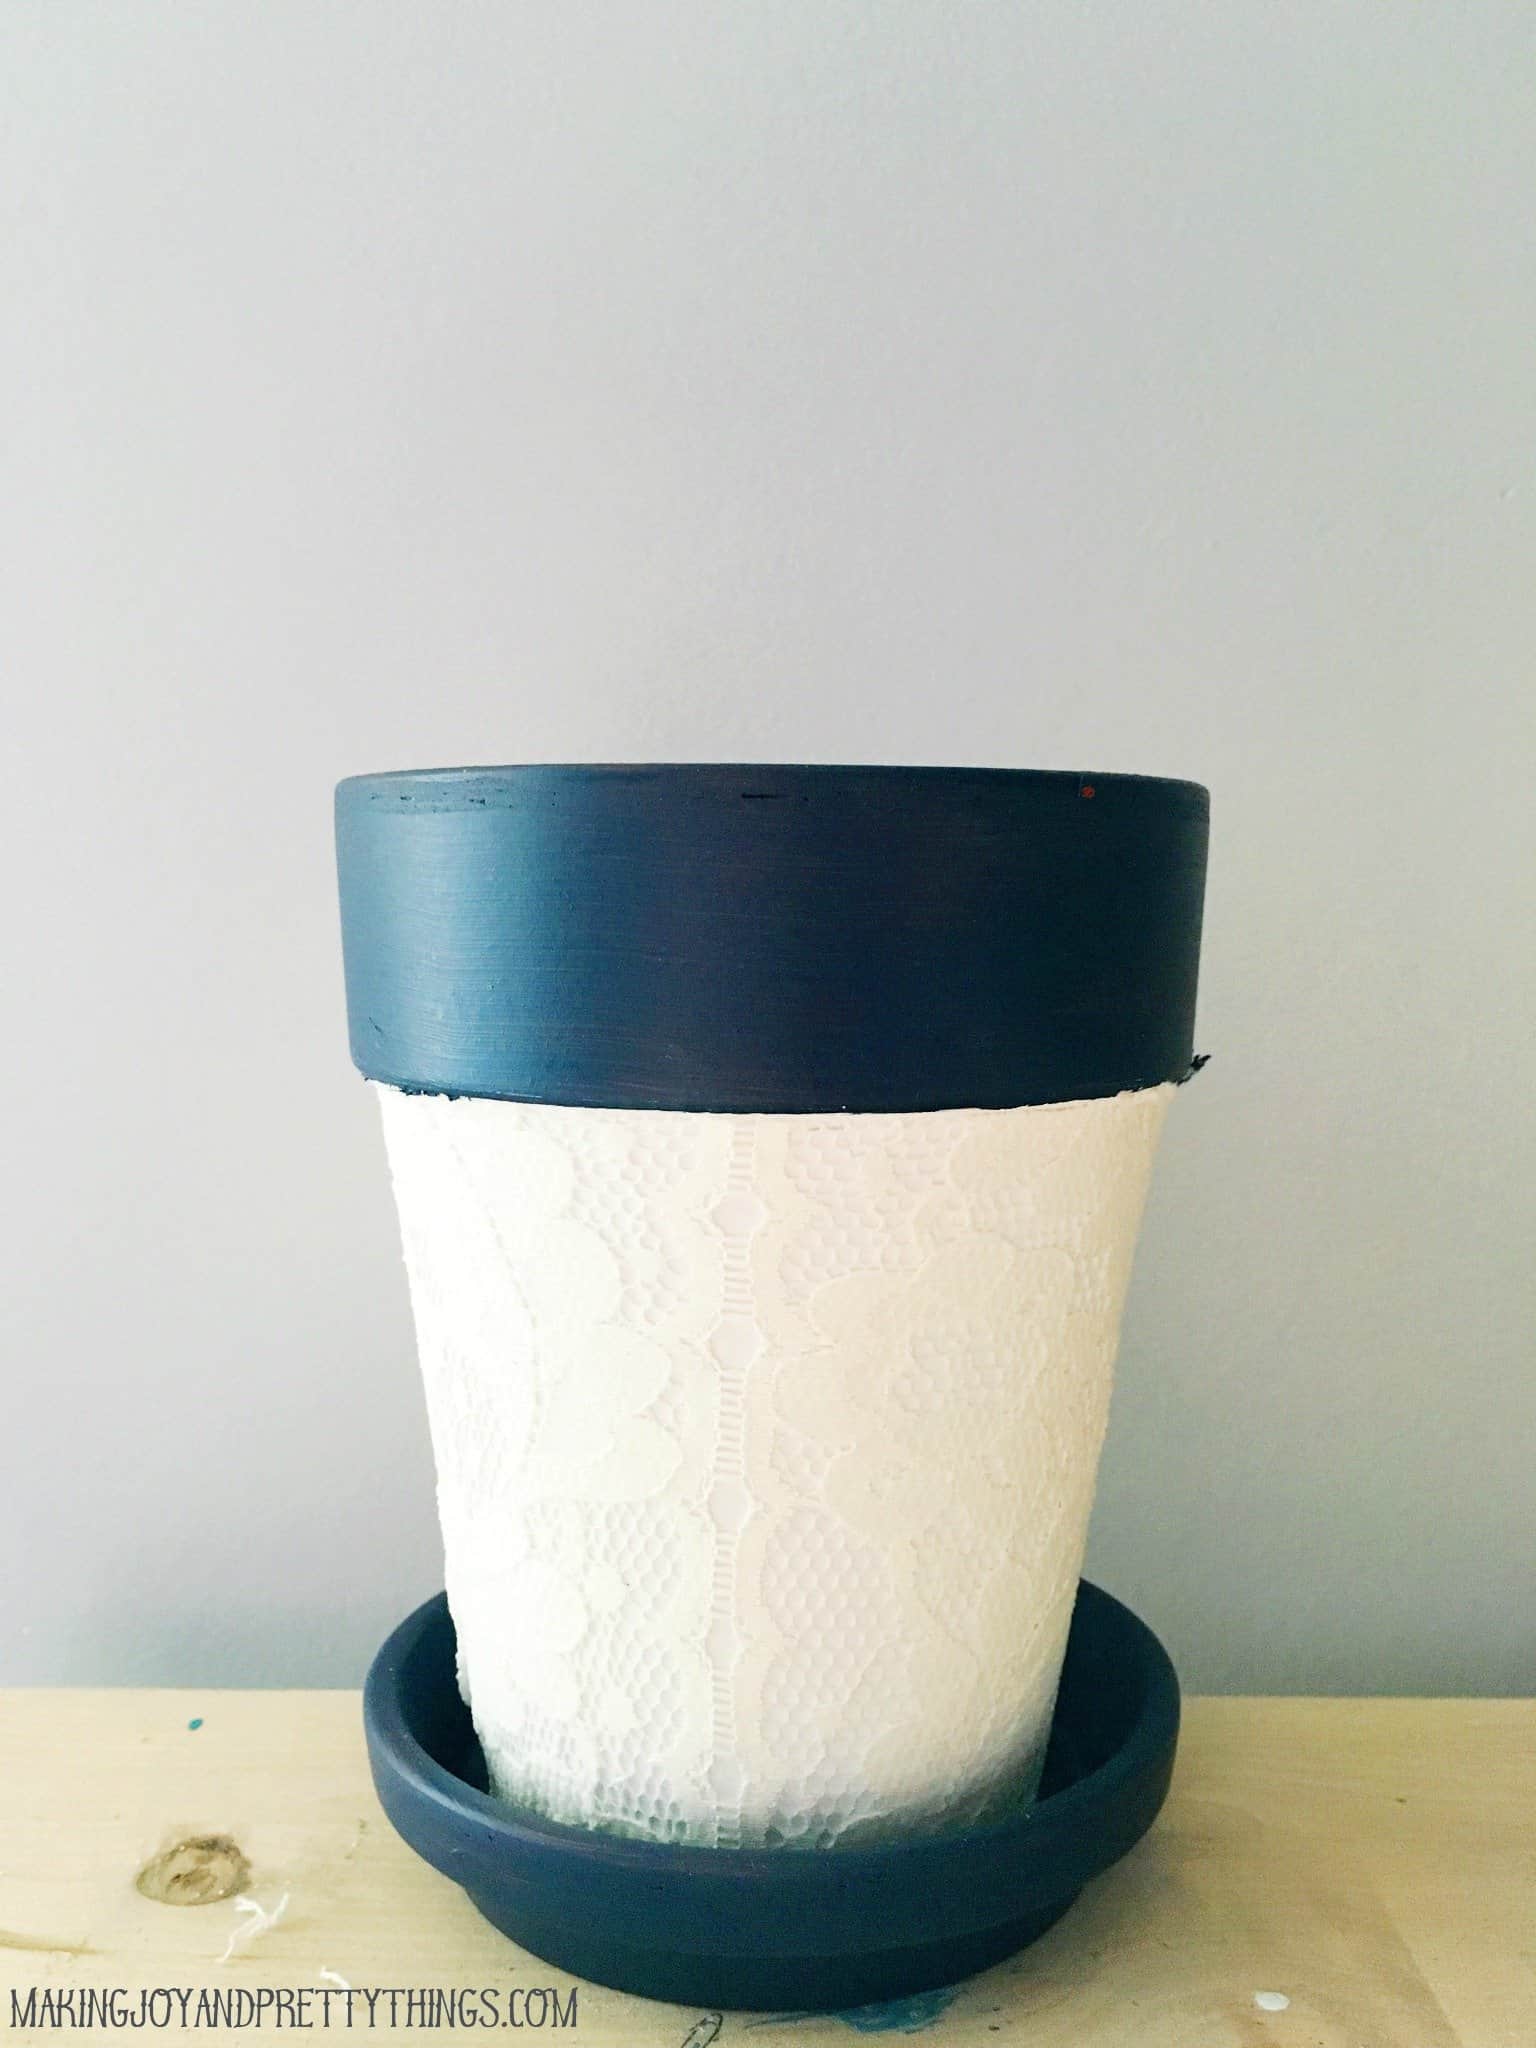 A look at the completed lace-covered pot. The terra cotta pot body is painted white and wrapped with lace fabric. The pot rim and saucer are both painted a deep blue.